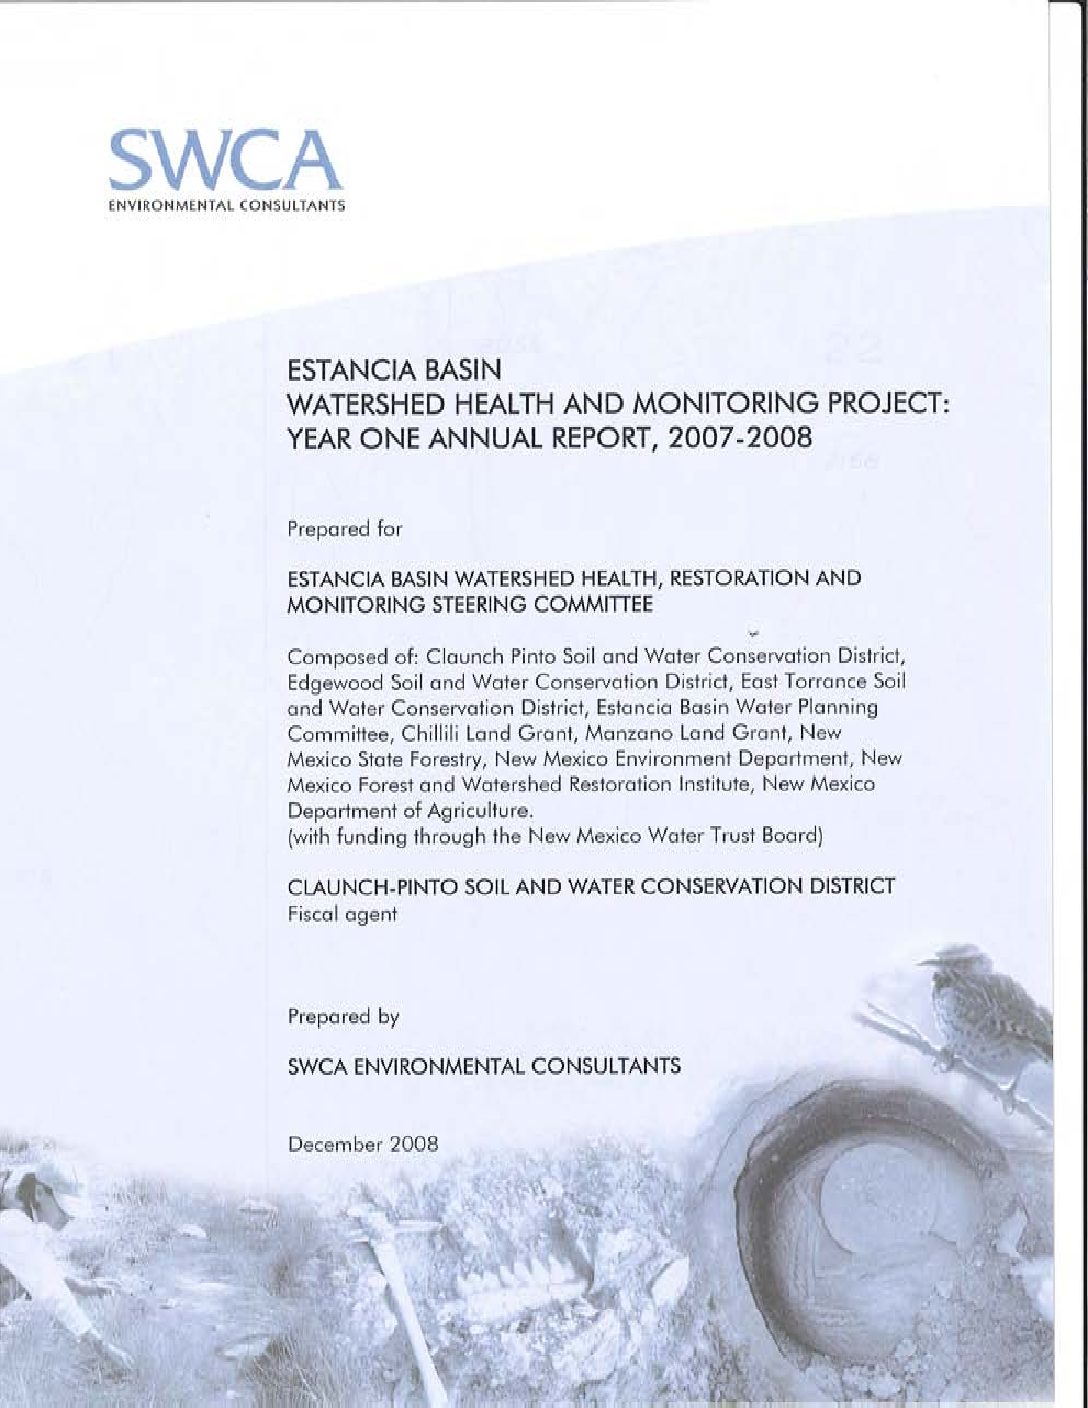 Estancia Basin Watershed Health and Monitoring Report 2007-2008